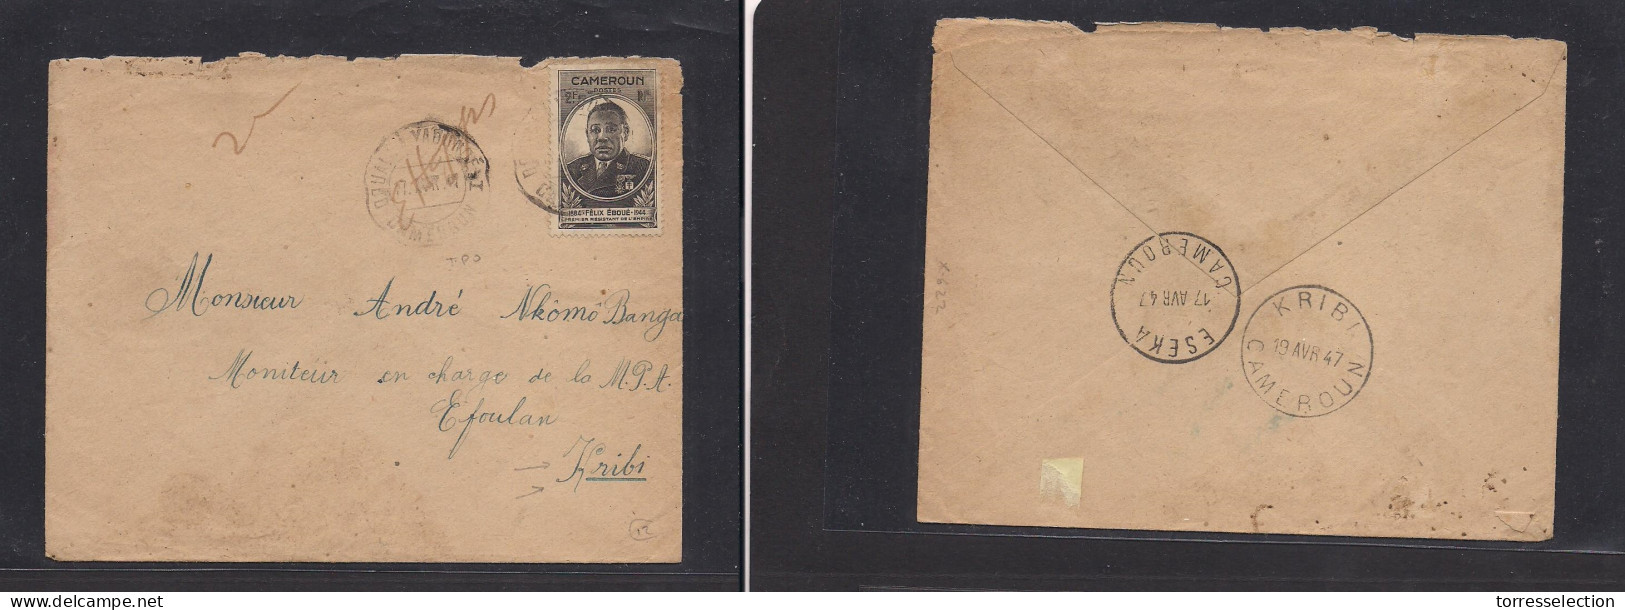 FRC - Cameroun. FRC Camerun - Cover - 1947 Tpo Doula Yabunde To Kribi Lacal Fkd Env. Easy Deal. XSALE. - Other & Unclassified